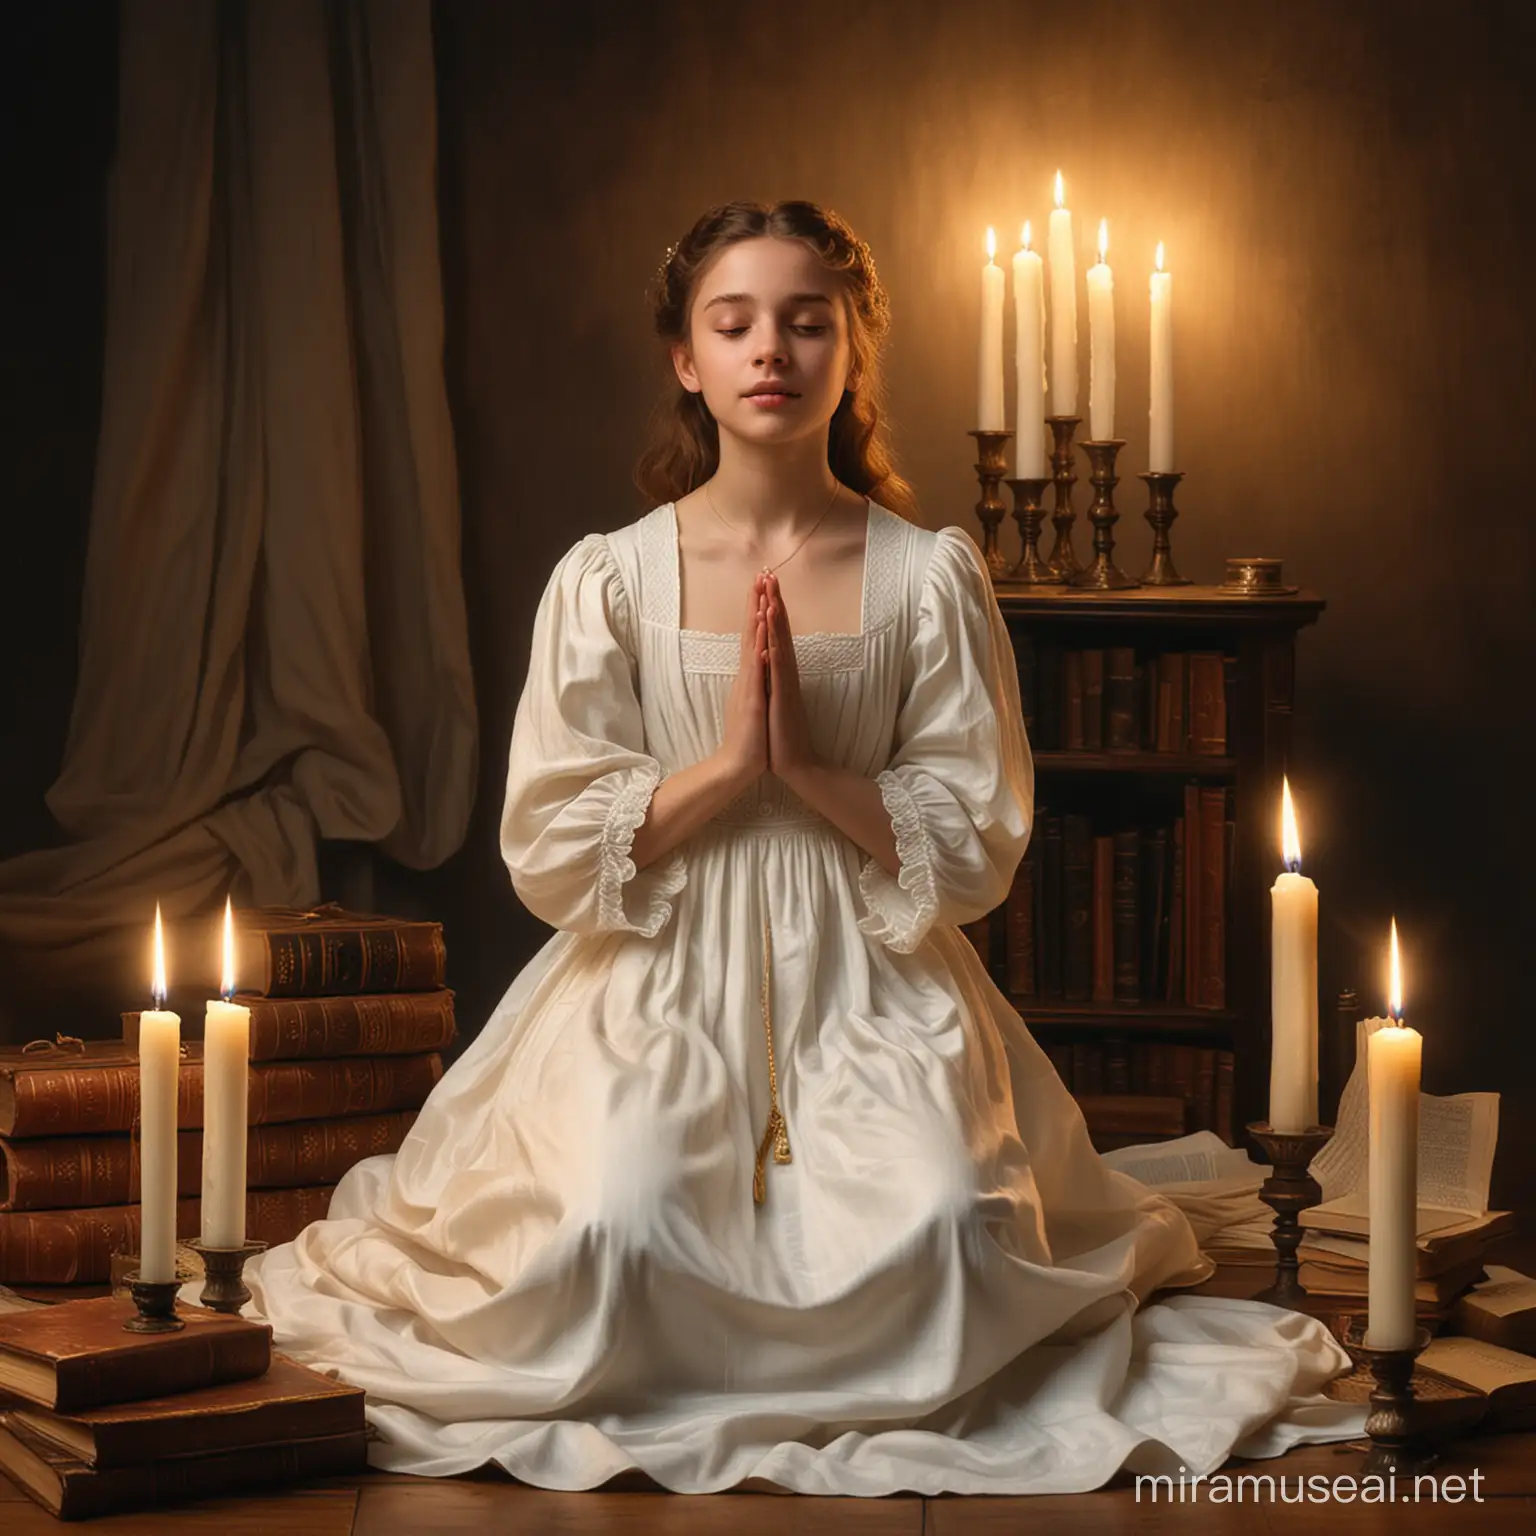 Girl in White Dress Praying Amid Candles and Books Rembrandtstyle Epiphany